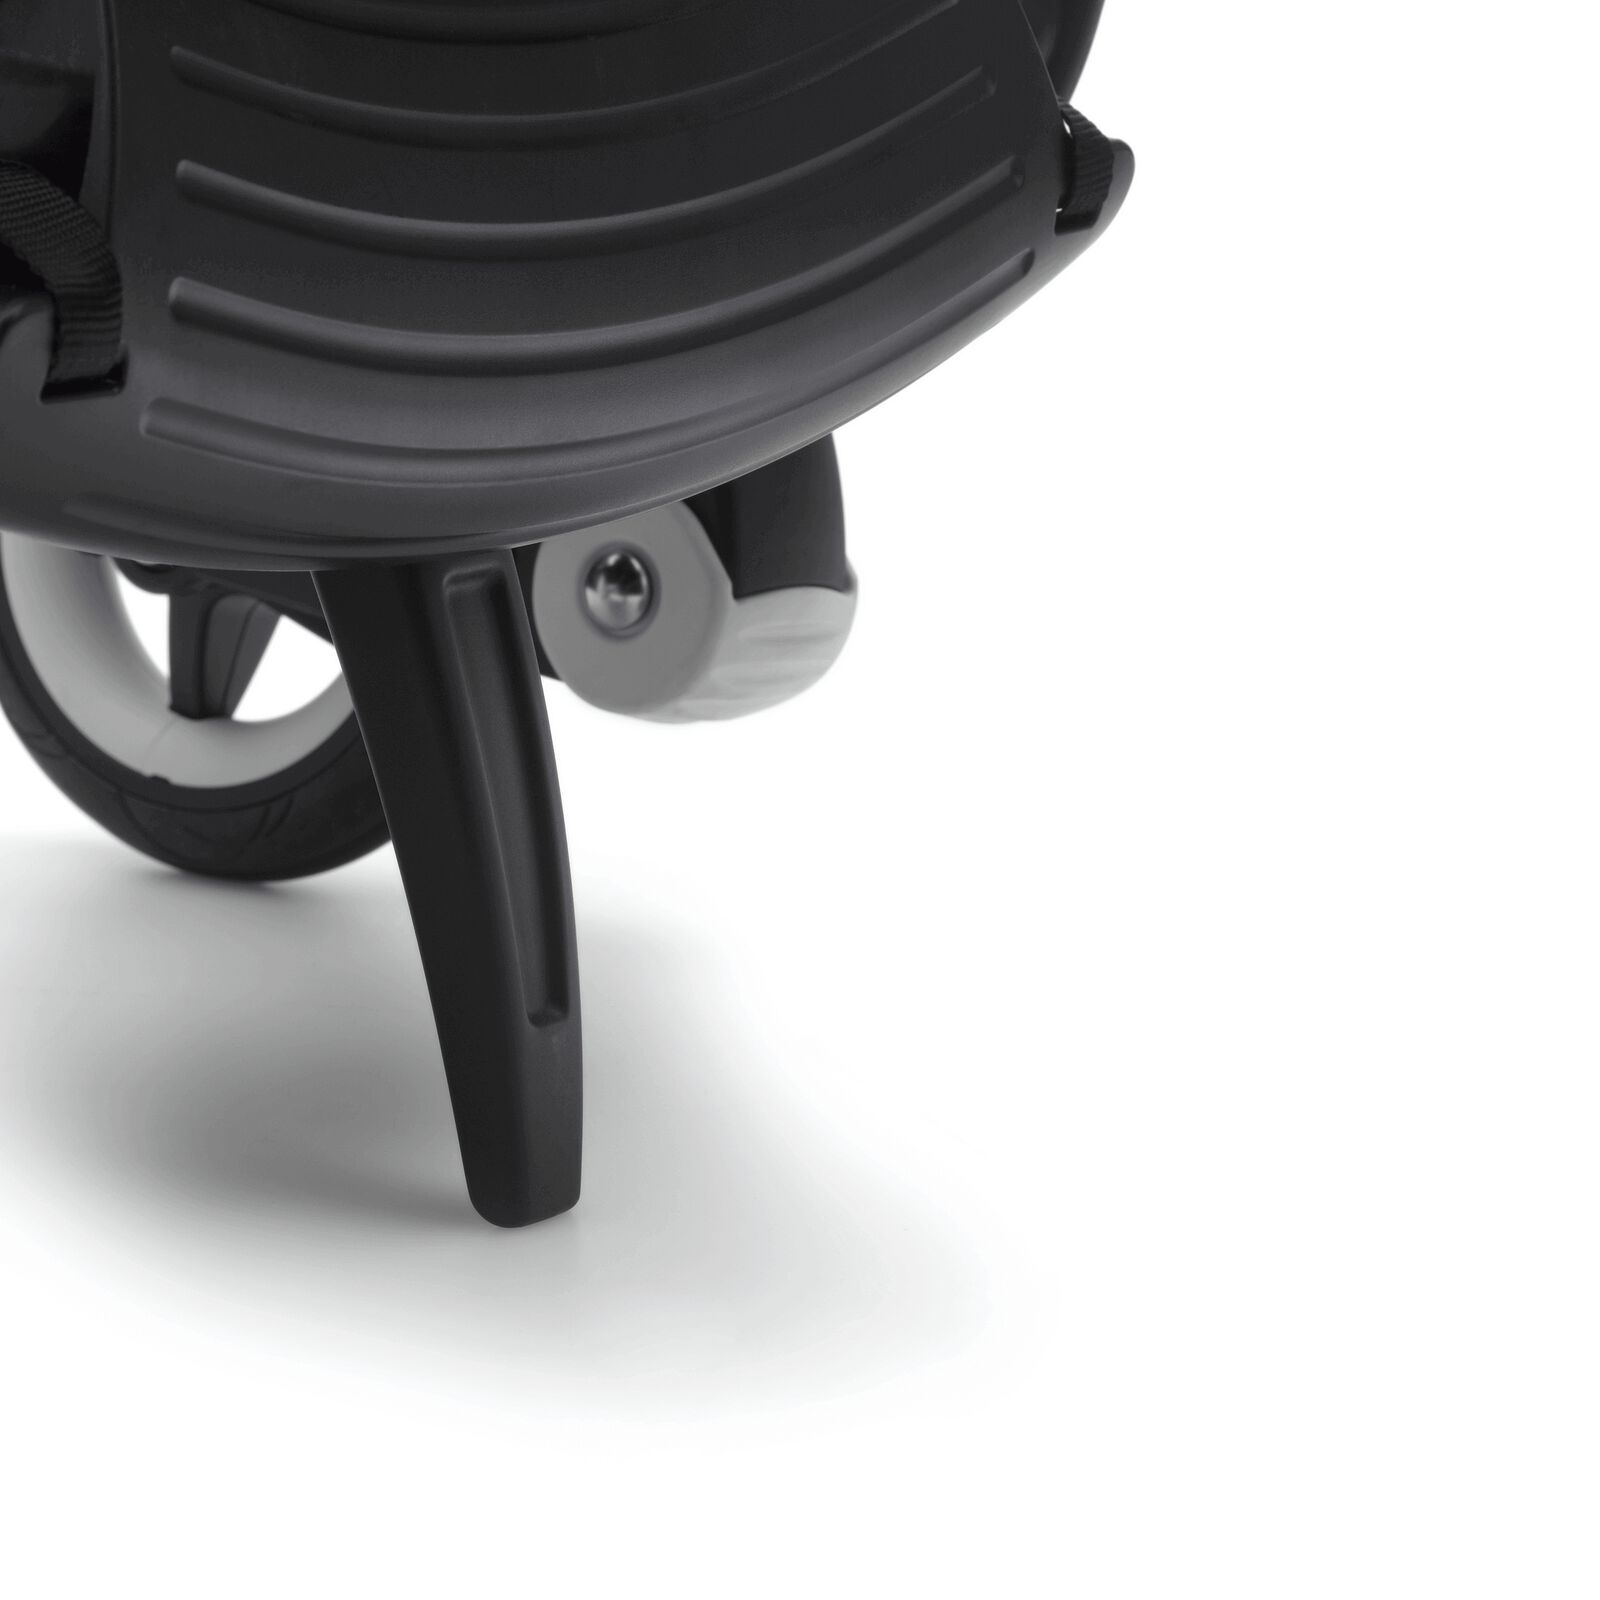 Bugaboo Bee support - View 1